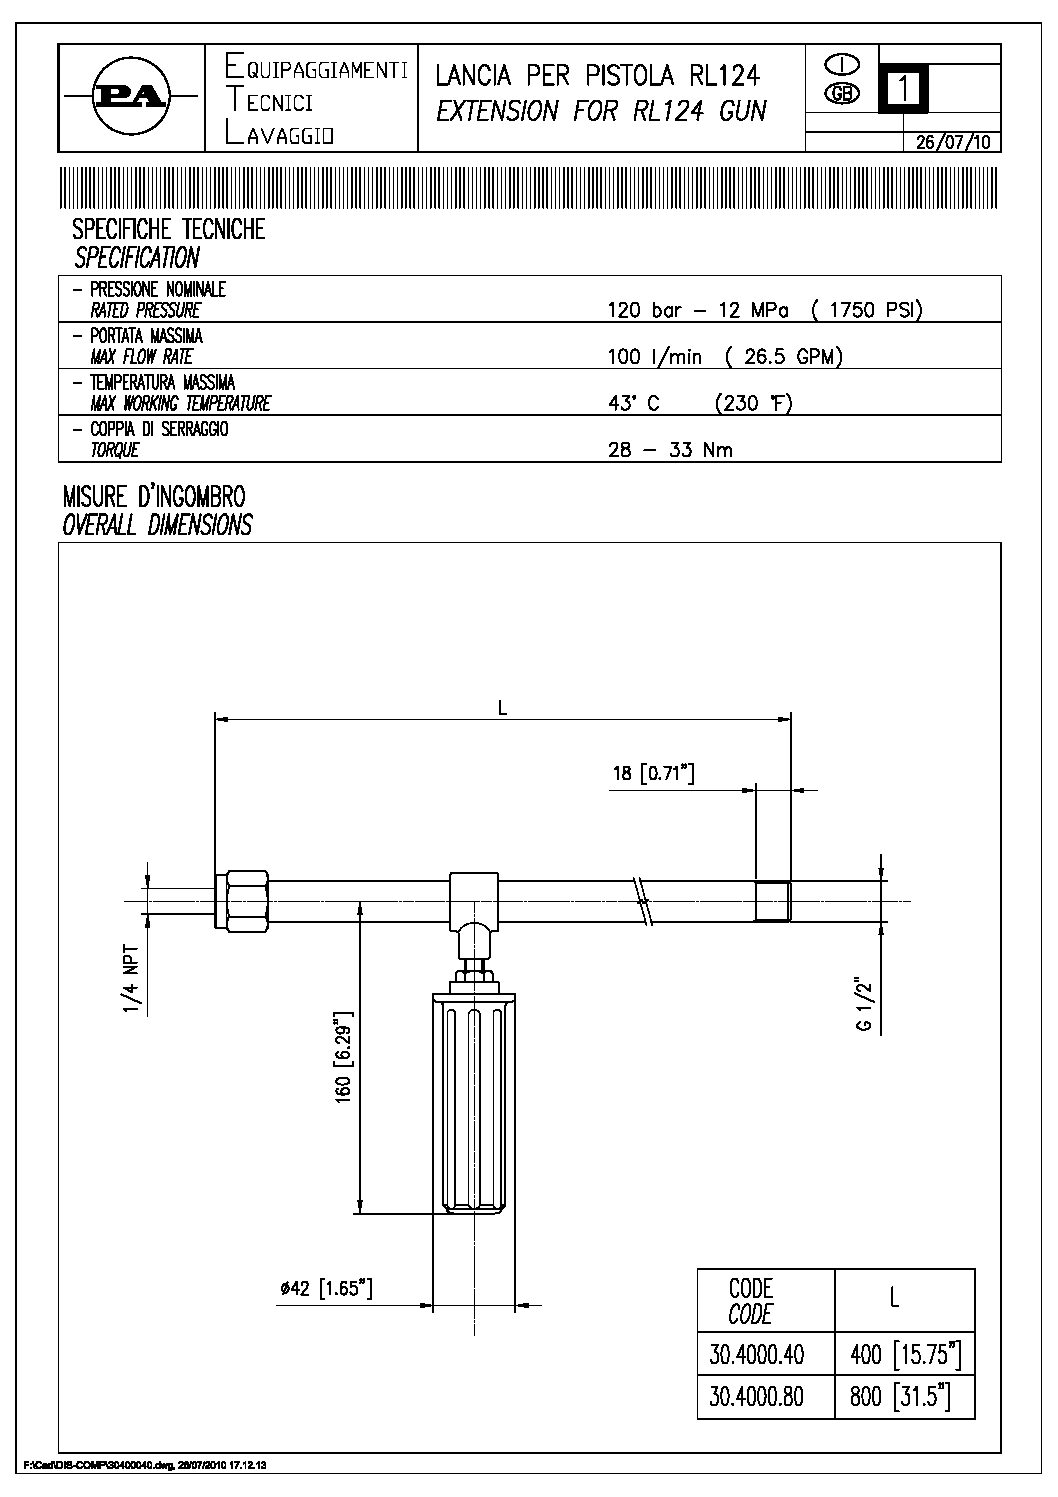 PA RL100/RL124 Extension technical information